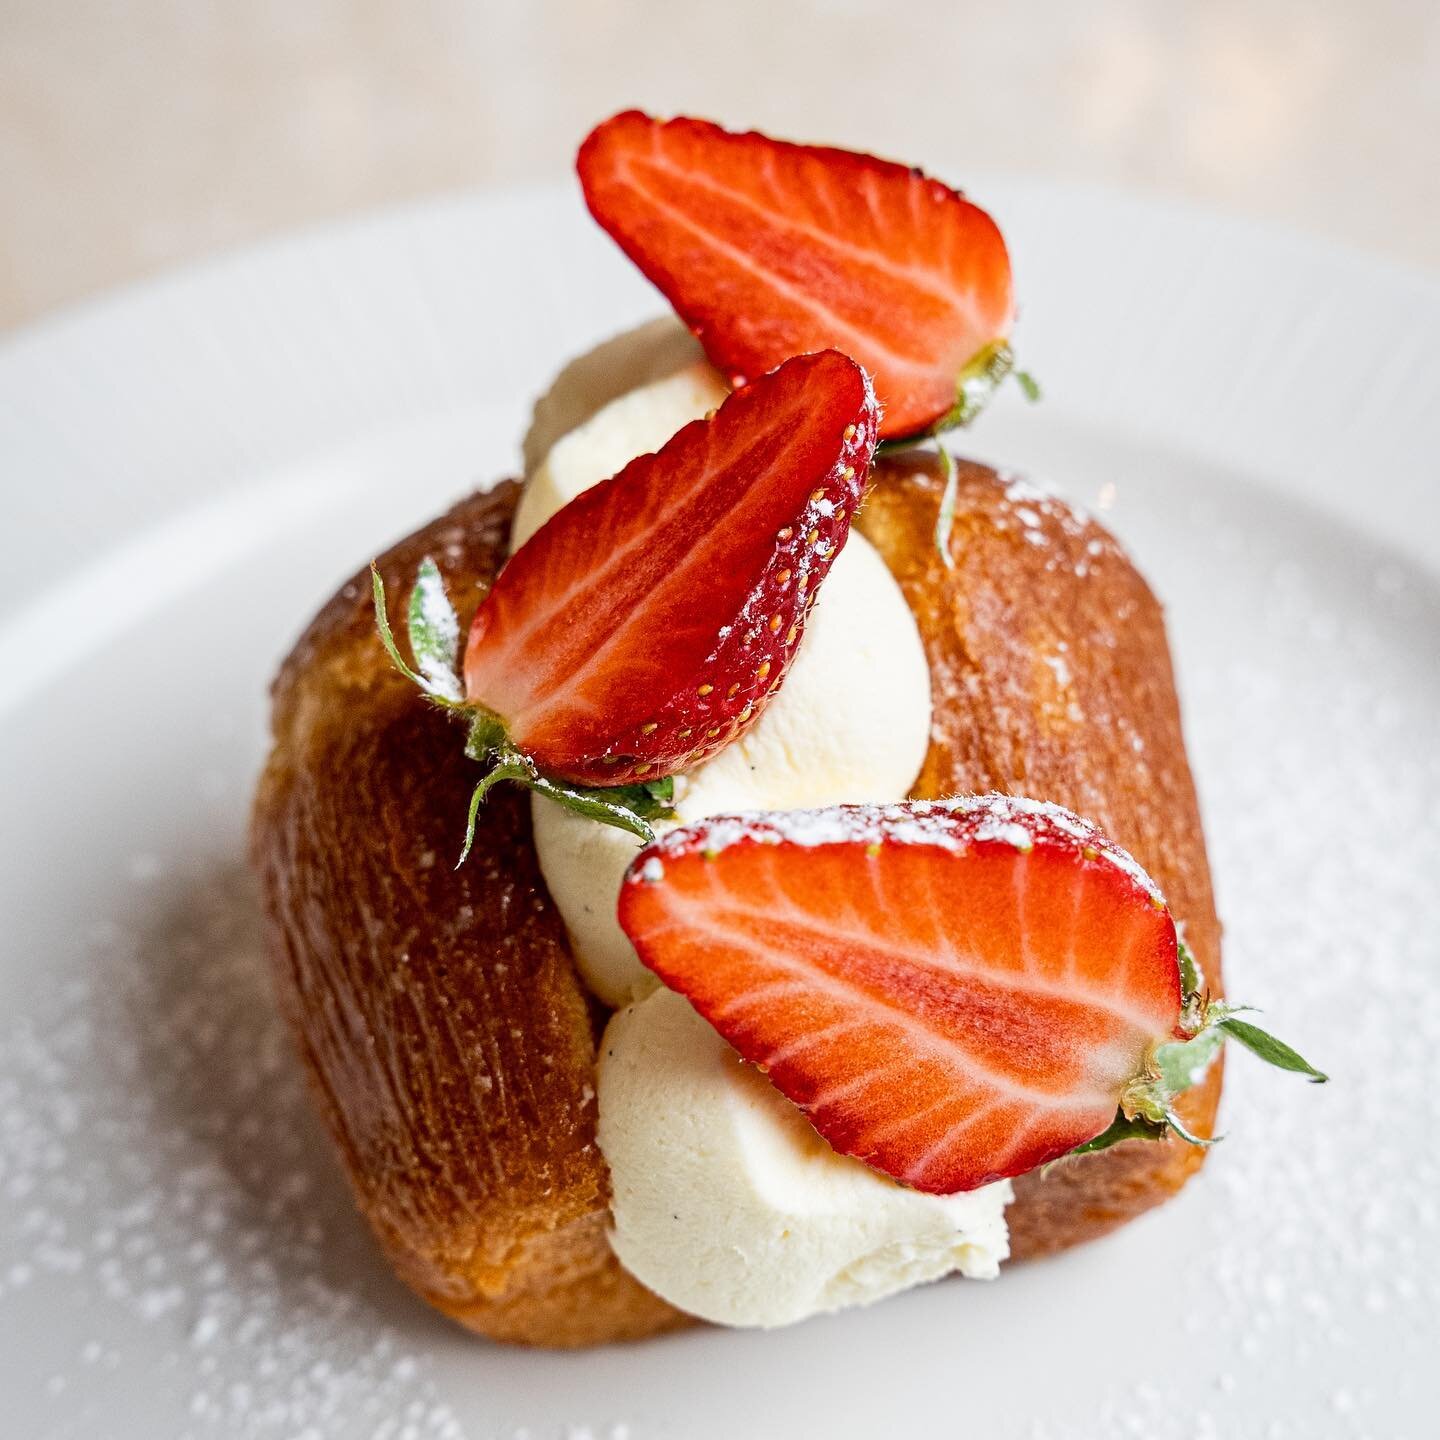 Sundays well spent with our Sunday Arrosto! Join us from 12-4pm tomorrow to try our delicious Italian roast featuring this Bab&agrave; Napoletano 🍓 Book via bio link.
.
.
.
.
#TerraModerna #Sunday #sundayvibes #sundayroast #dessert #sweettooth